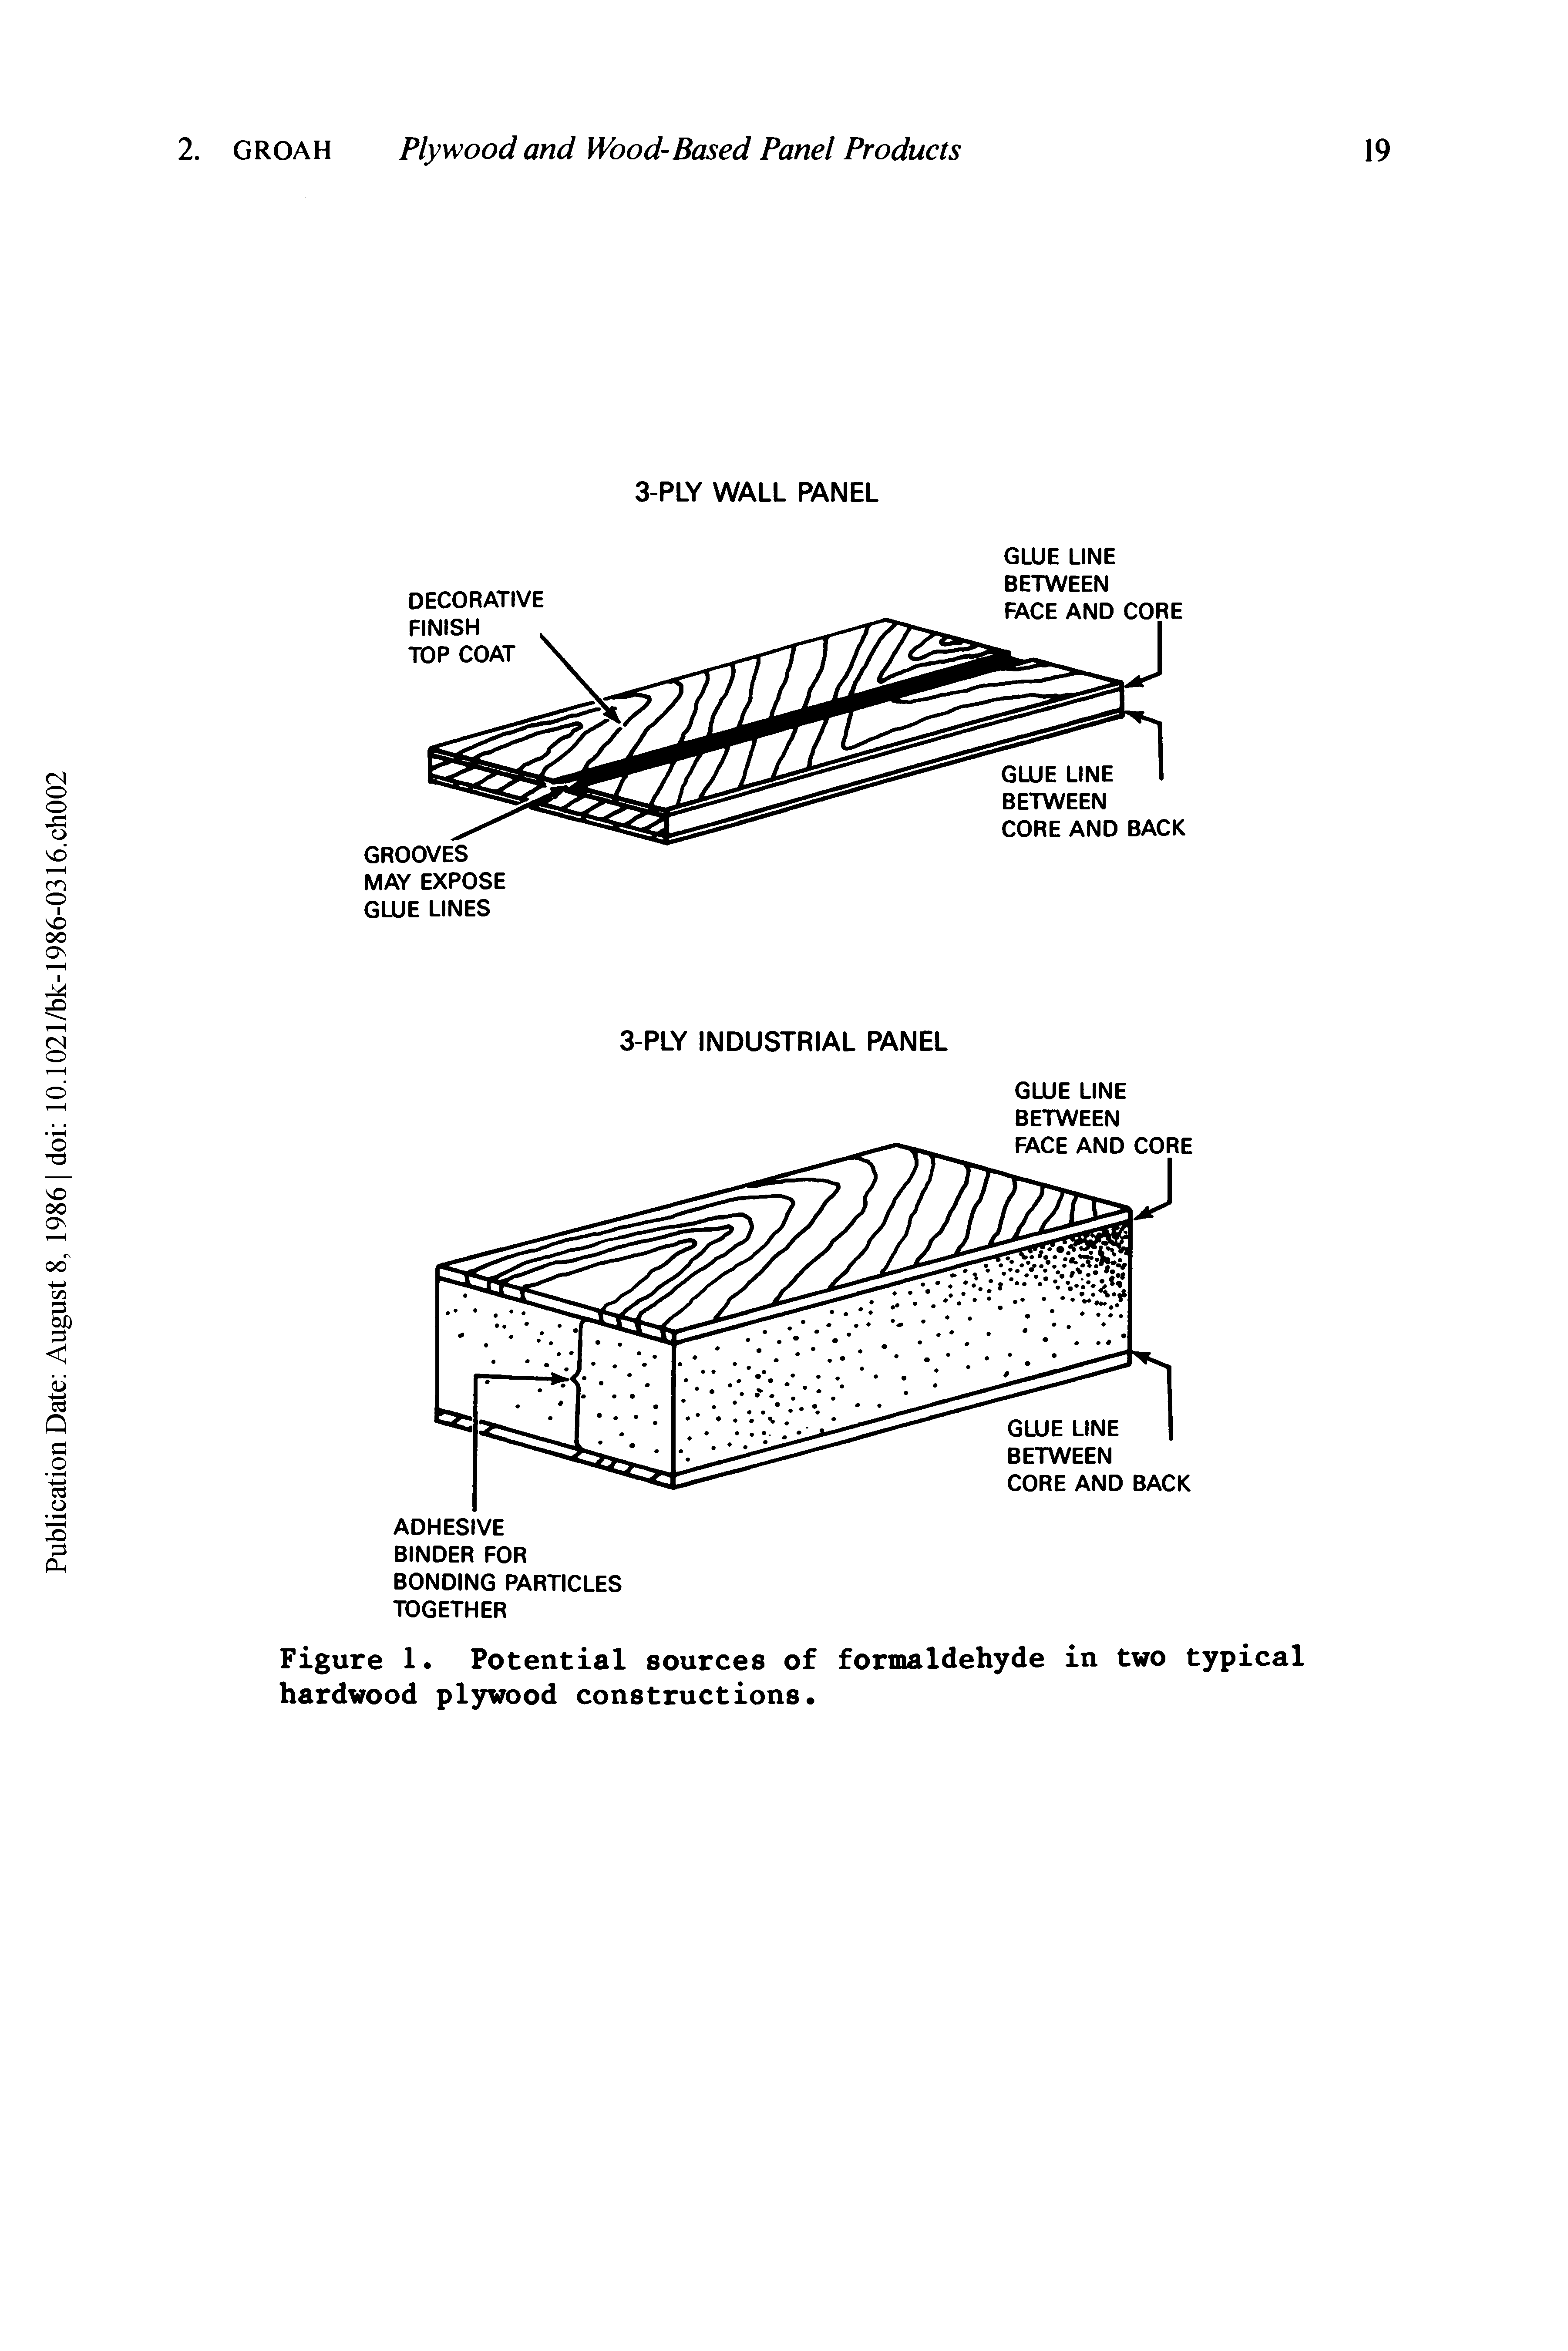 Figure 1. Potential sources of formaldehyde in two typical hardwood plywood constructions.